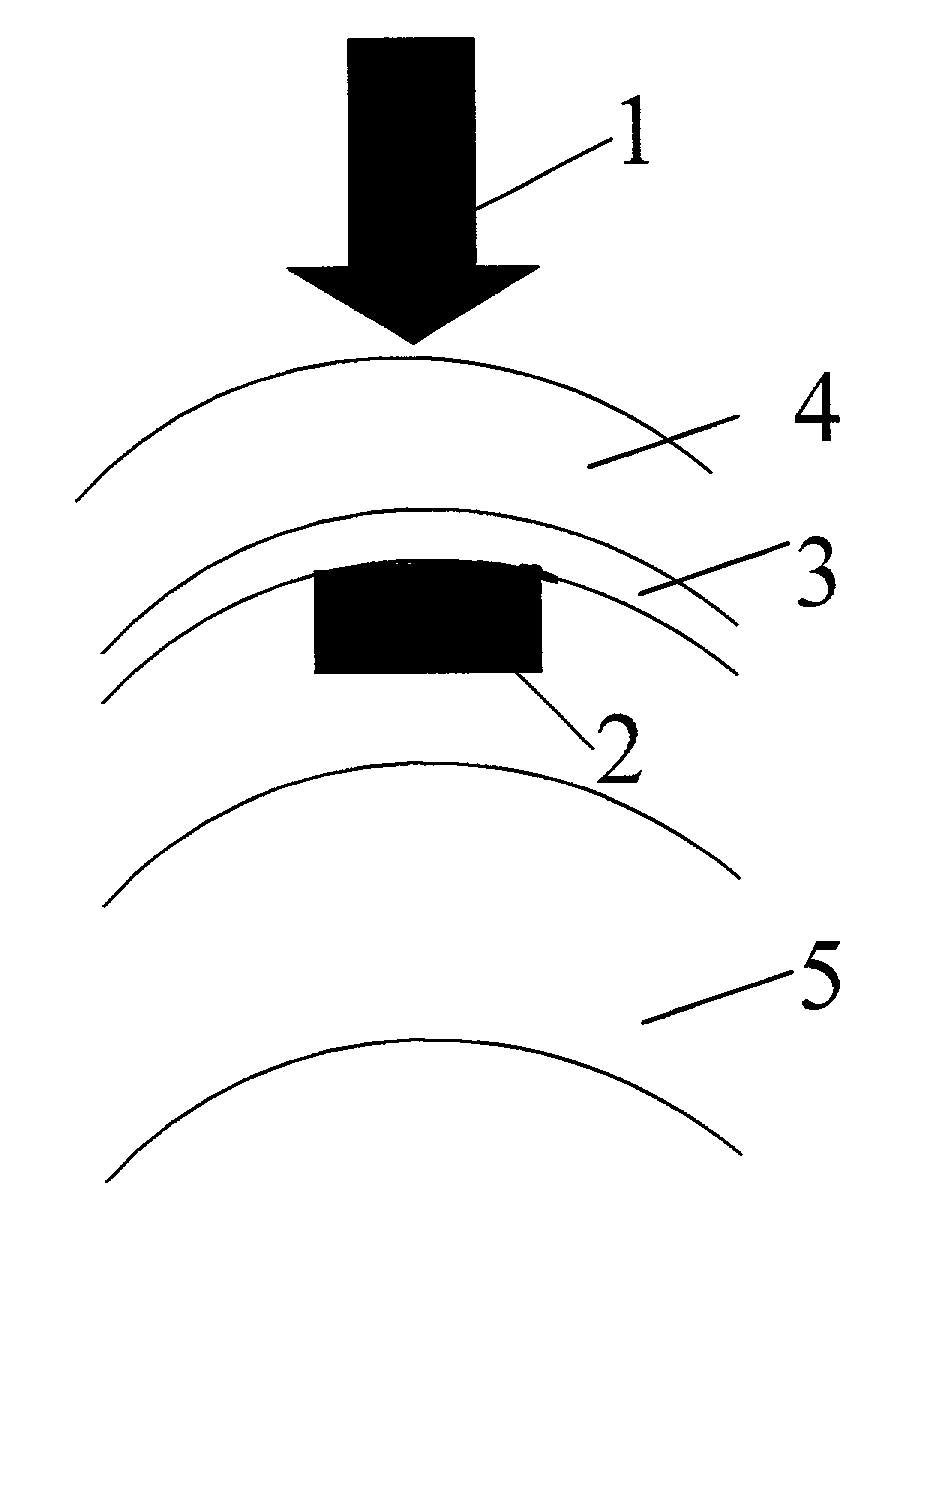 Method and apparatus for treatment of presbyopia by lens relaxation and anterior shift